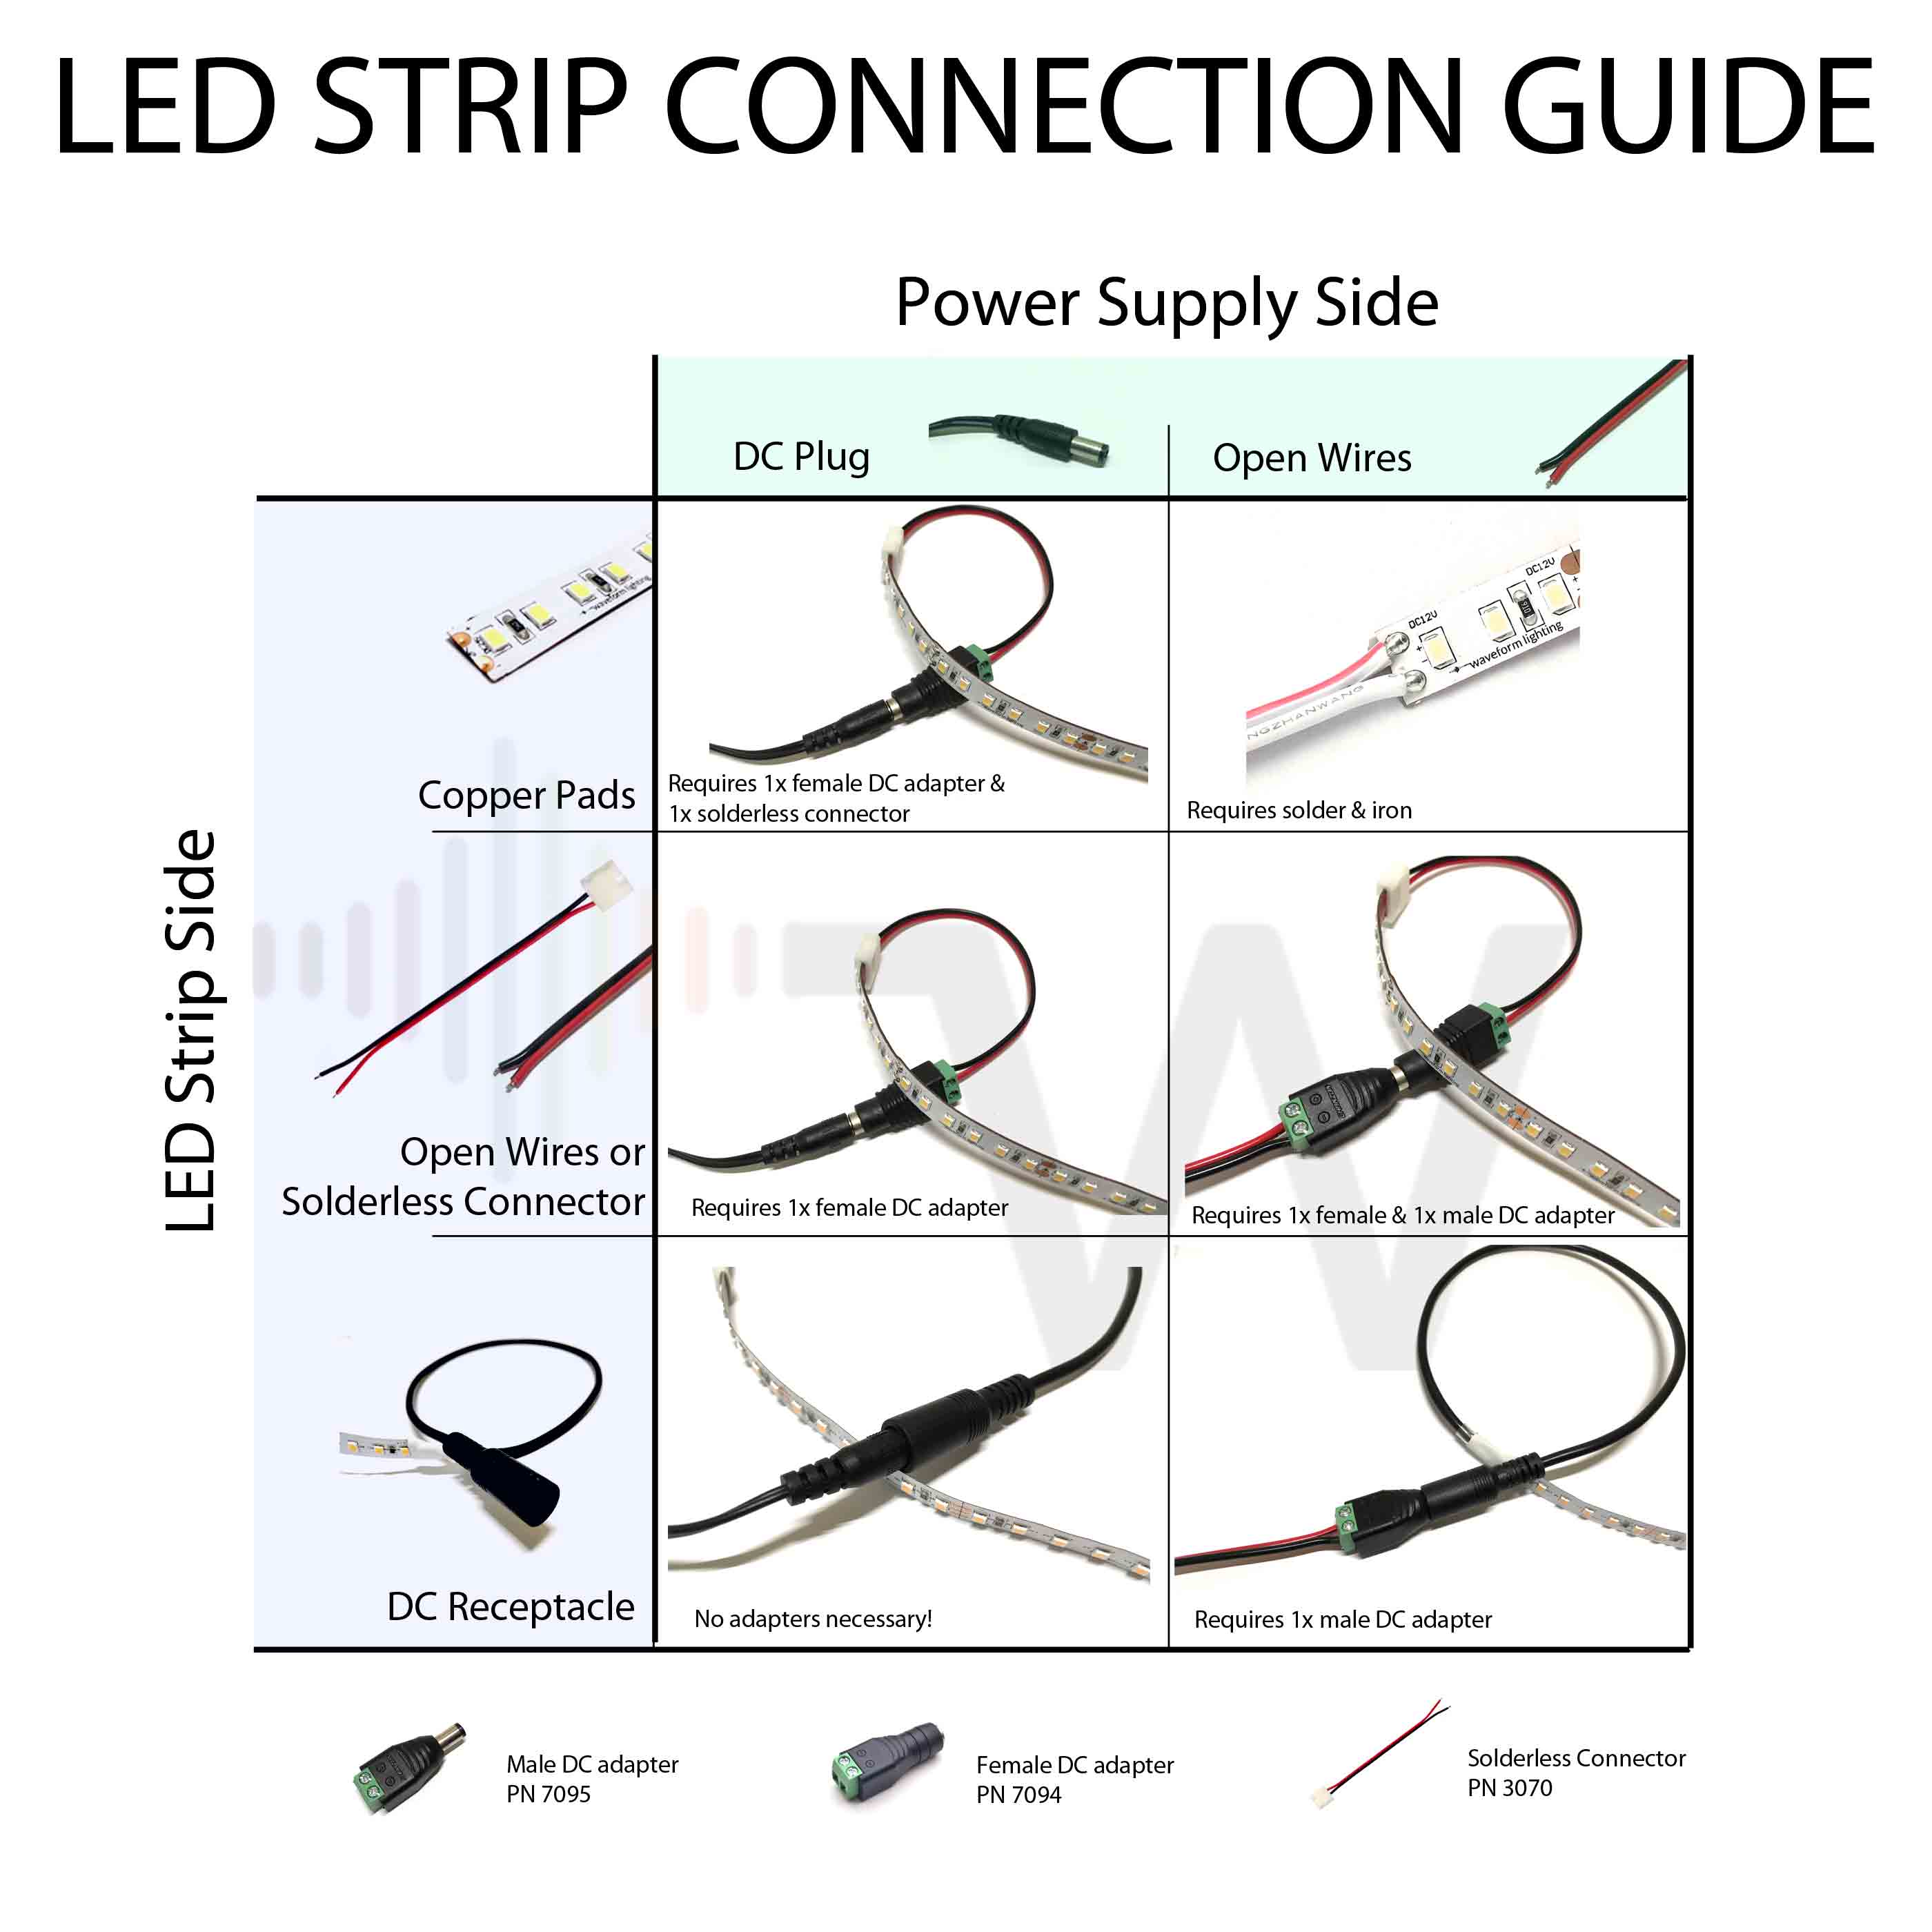 Led Strip To A Power Supply